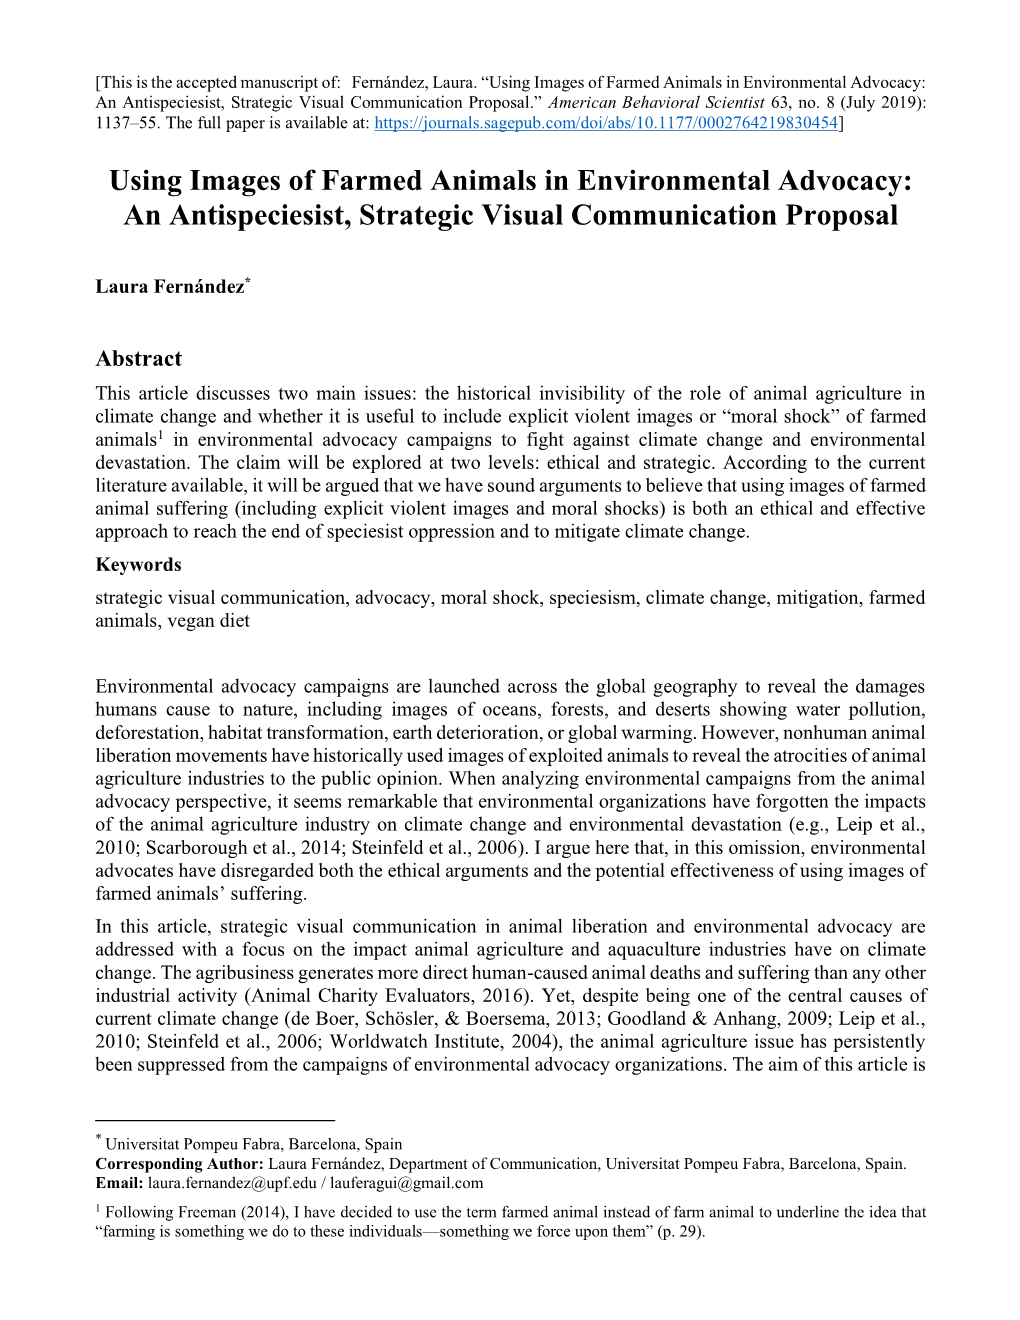 Using Images of Farmed Animals in Environmental Advocacy: an Antispeciesist, Strategic Visual Communication Proposal.” American Behavioral Scientist 63, No